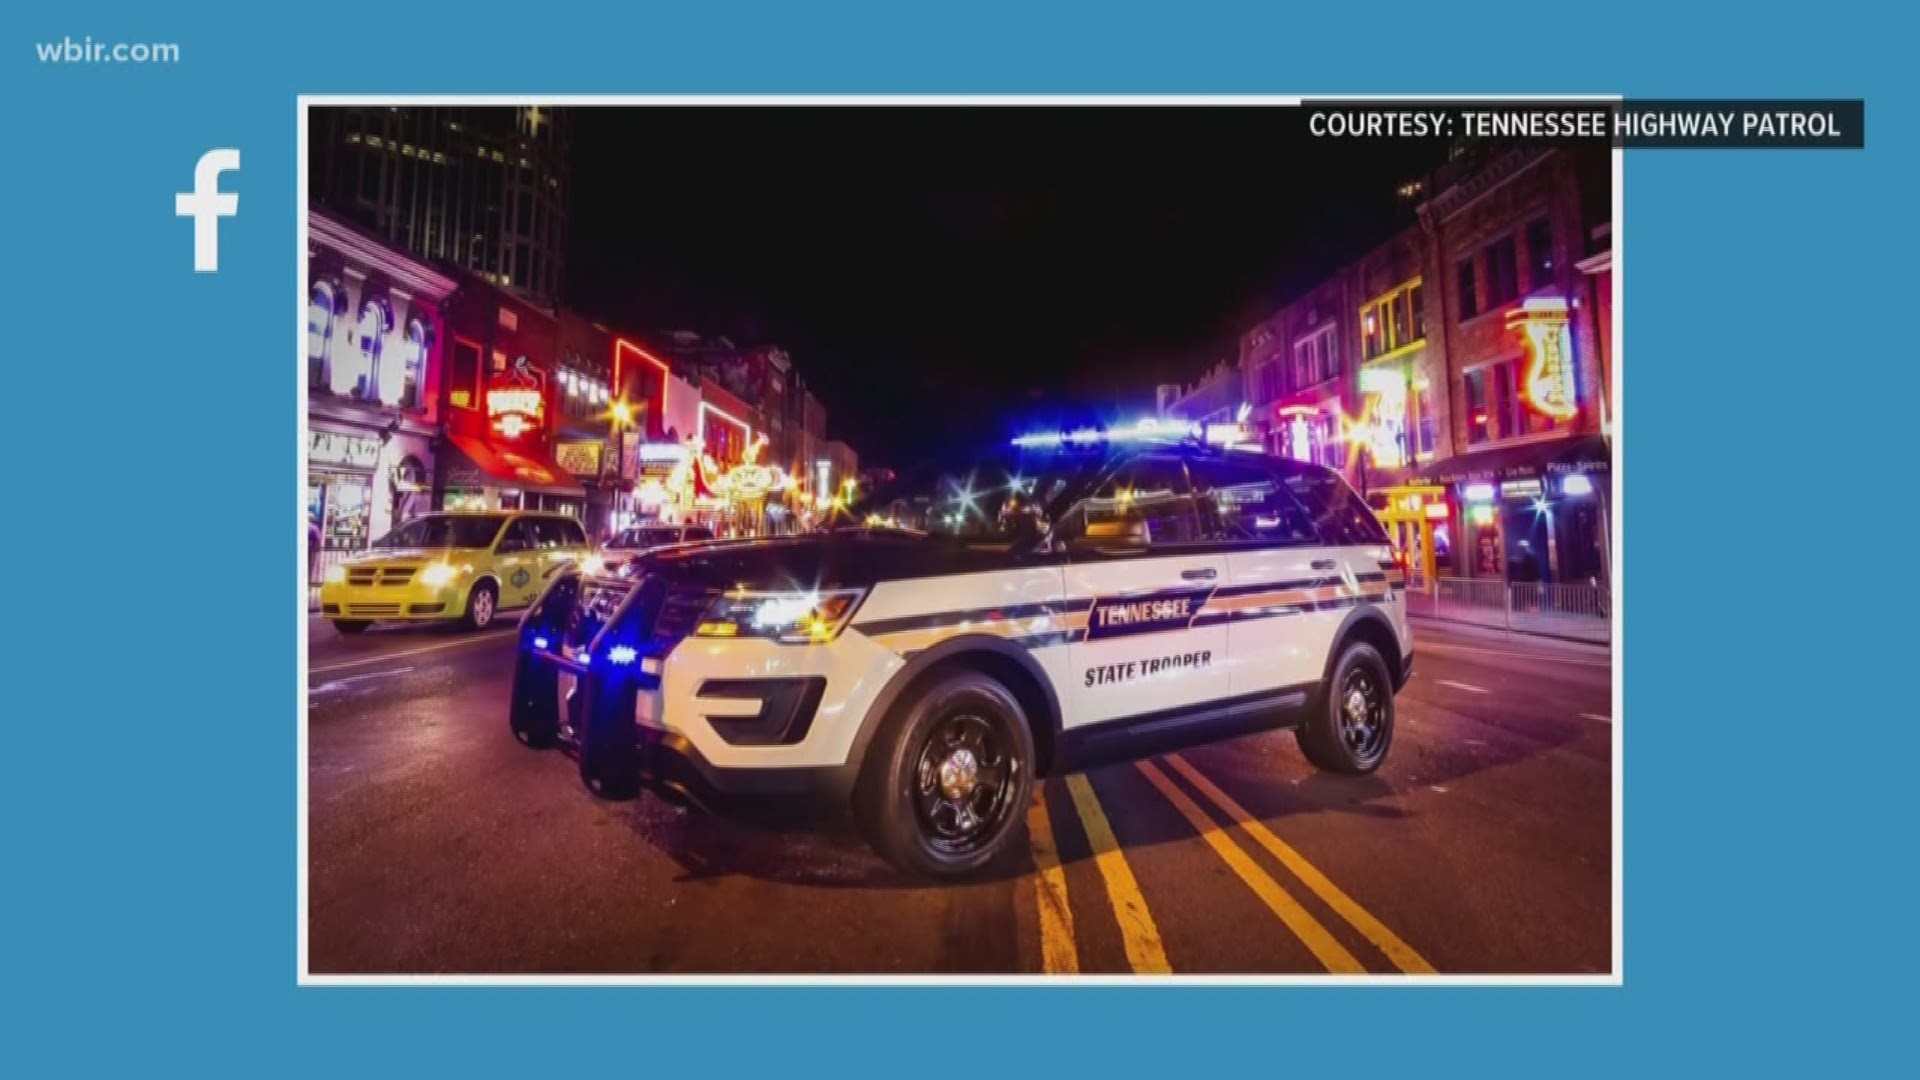 THP and 39 other states are competing for the title of best-looking trooper cruiser in the country. The winner will be featured on the American Association of State Troopers calendar.